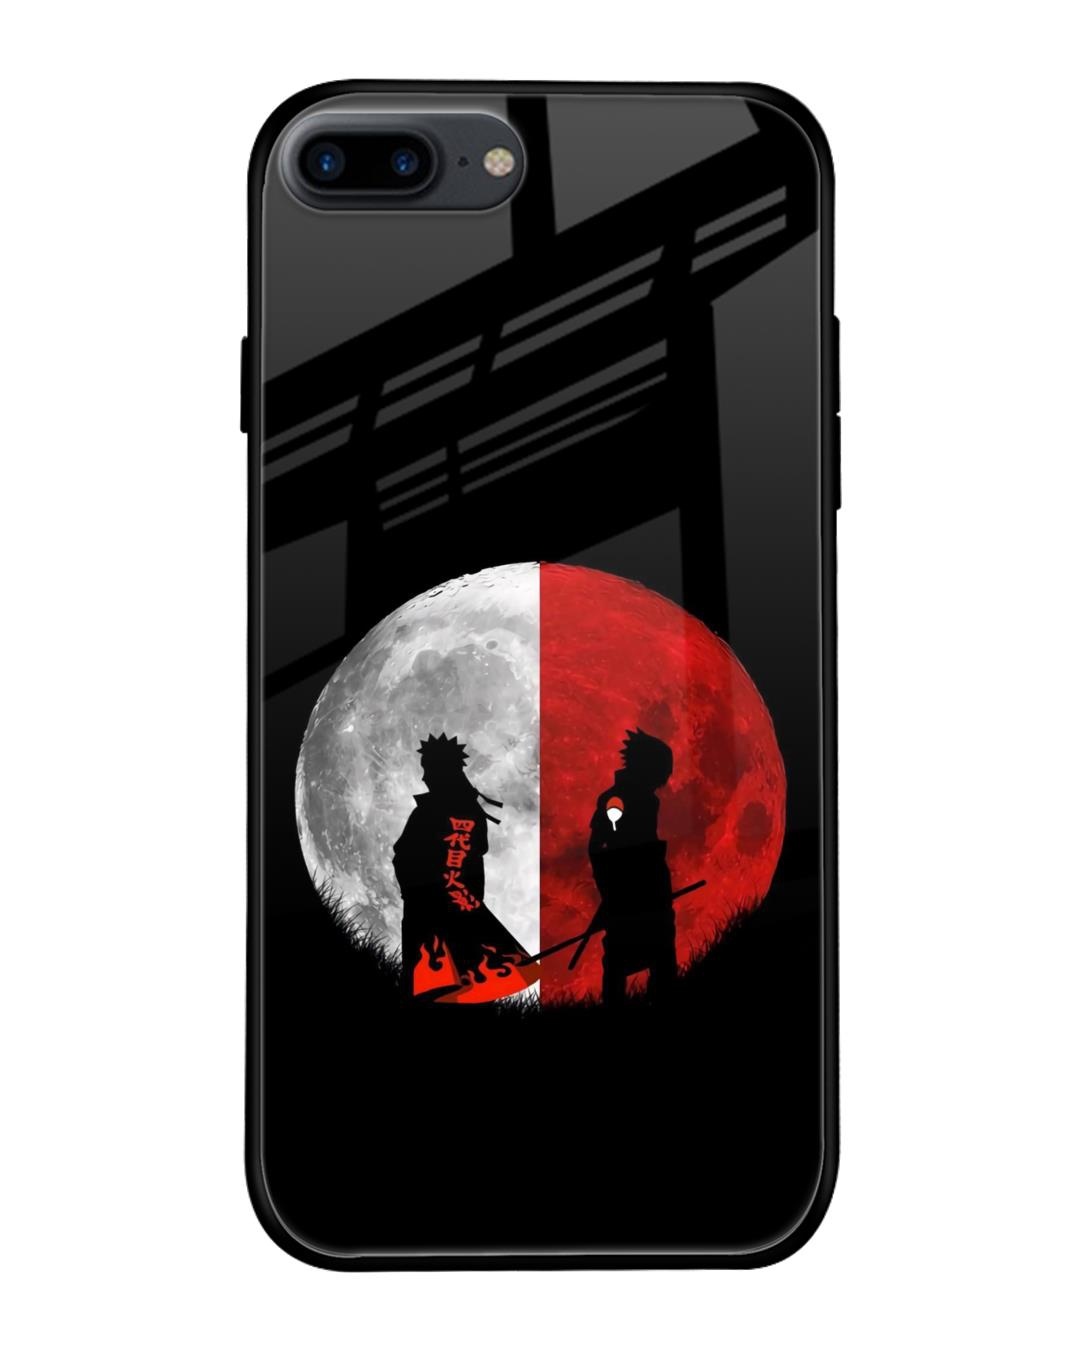 Dug Dug Cuddling Anime Couple Designer Printed Mobile Phone Back Case Cover  For Apple iPhone 7 Plus  Apple iPhone 7